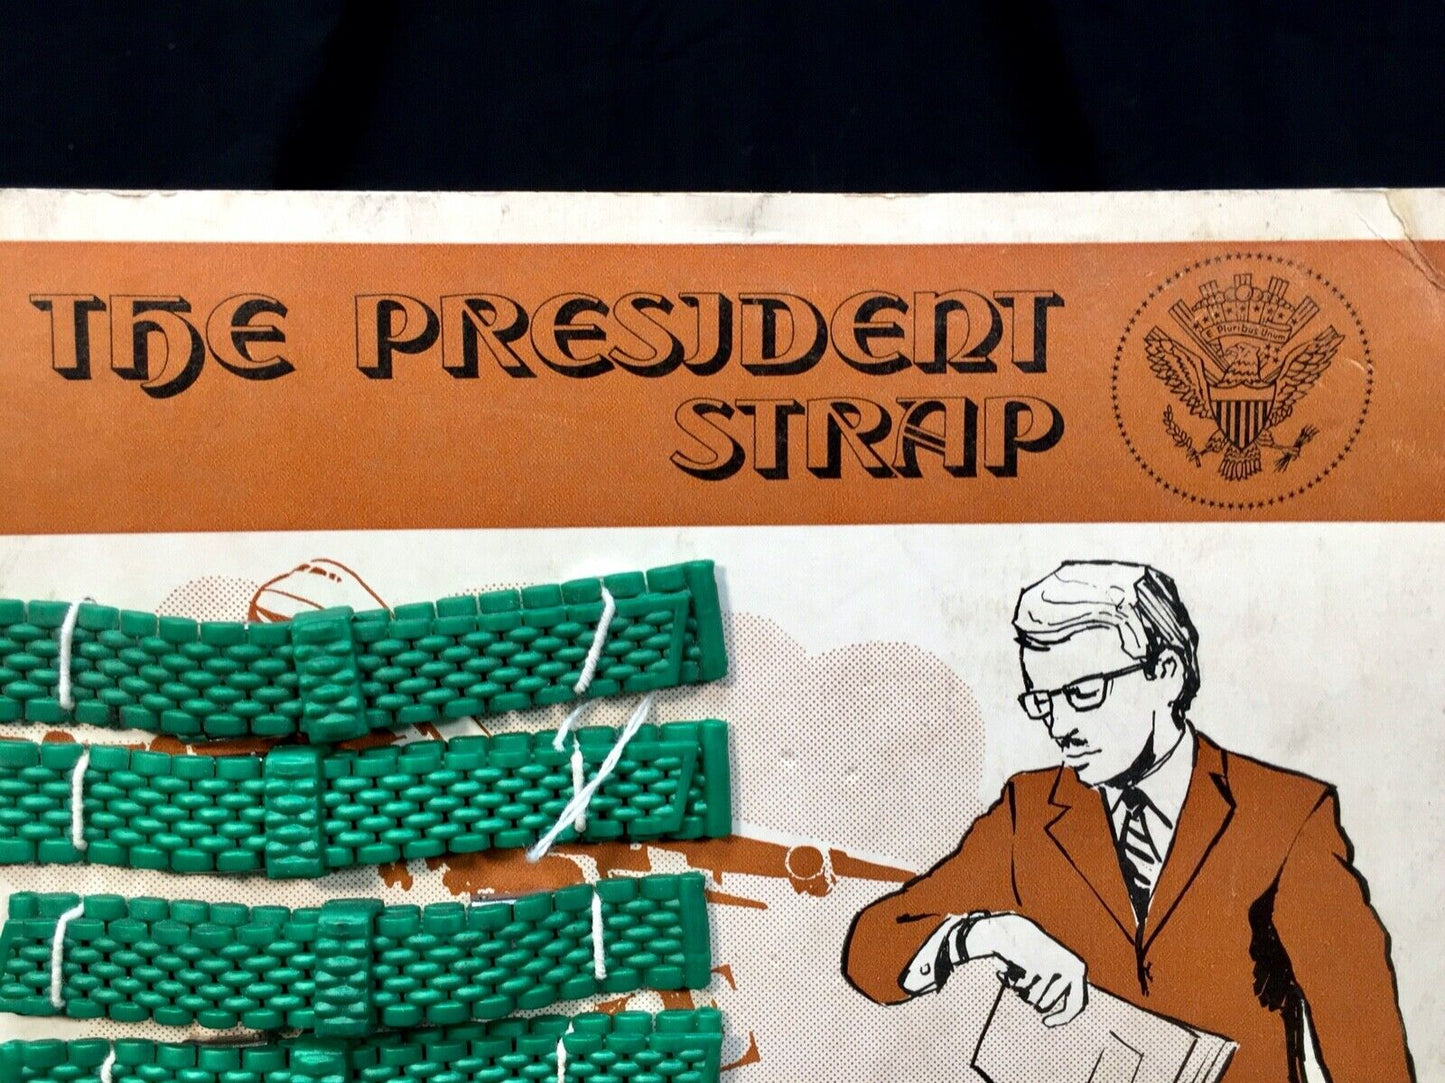 Vintage Advertising - Show Card for The President Green Watch Straps / Complete